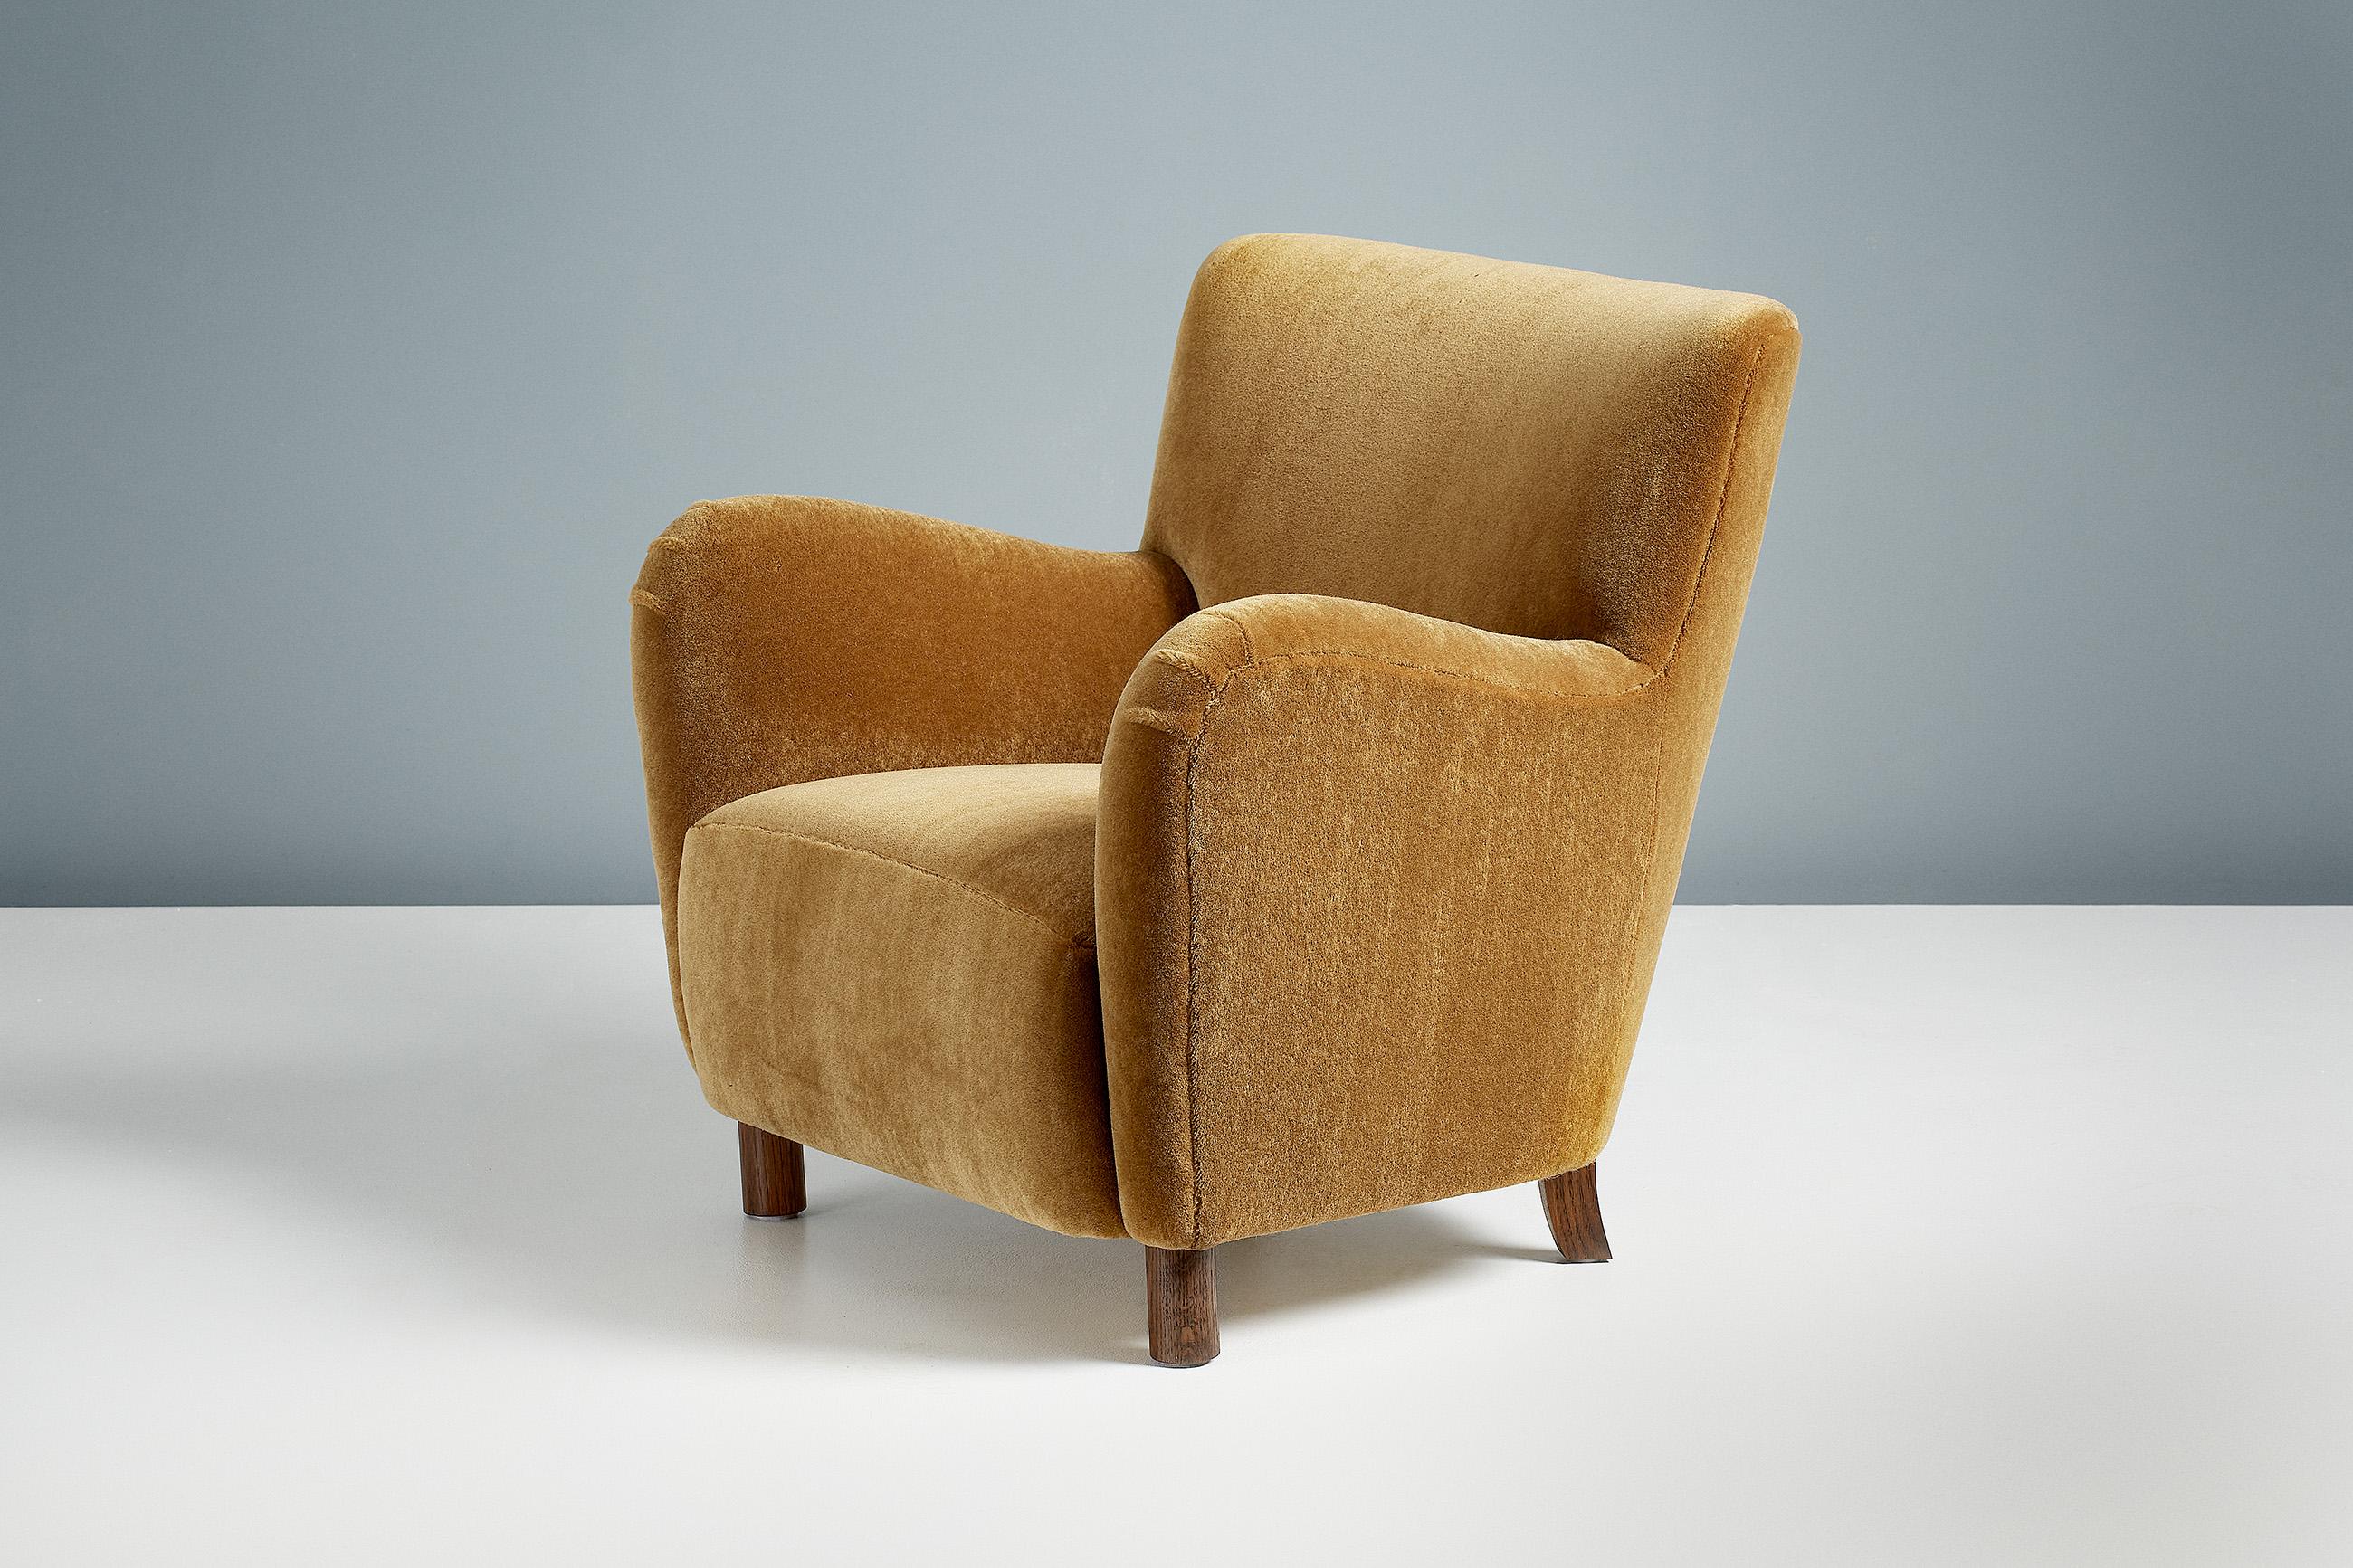 Dagmar Design

Model 54 lounge chair

A custom made lounge chair developed and hand-made at our workshops in London using the highest quality materials. The 54 chair is available to order in a range of different shearling colours and fabrics